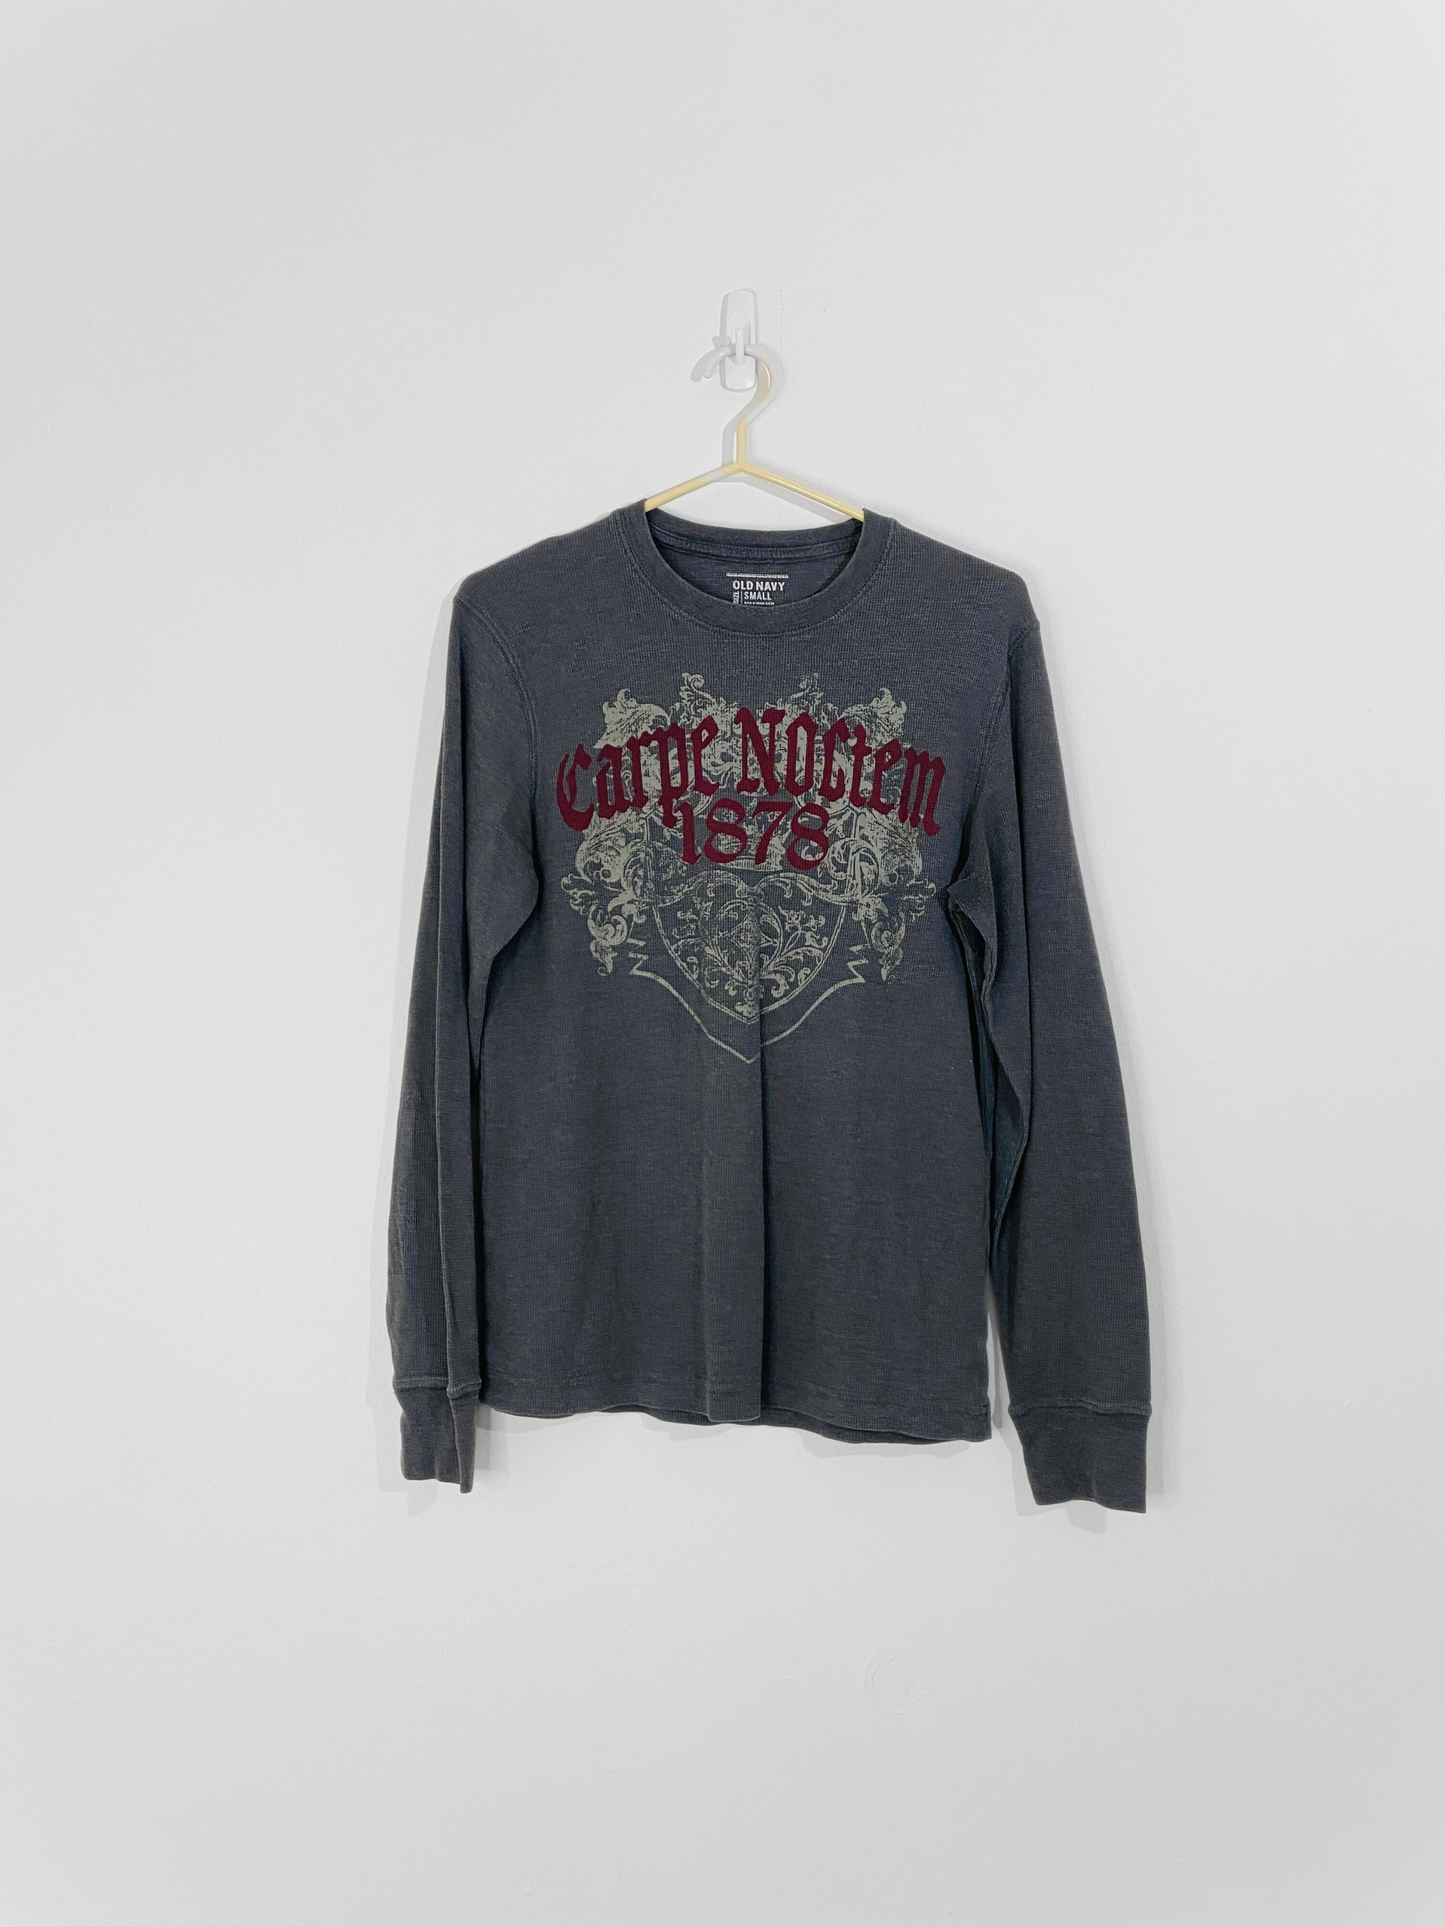 Grey Graphic Long Sleeve (Small)